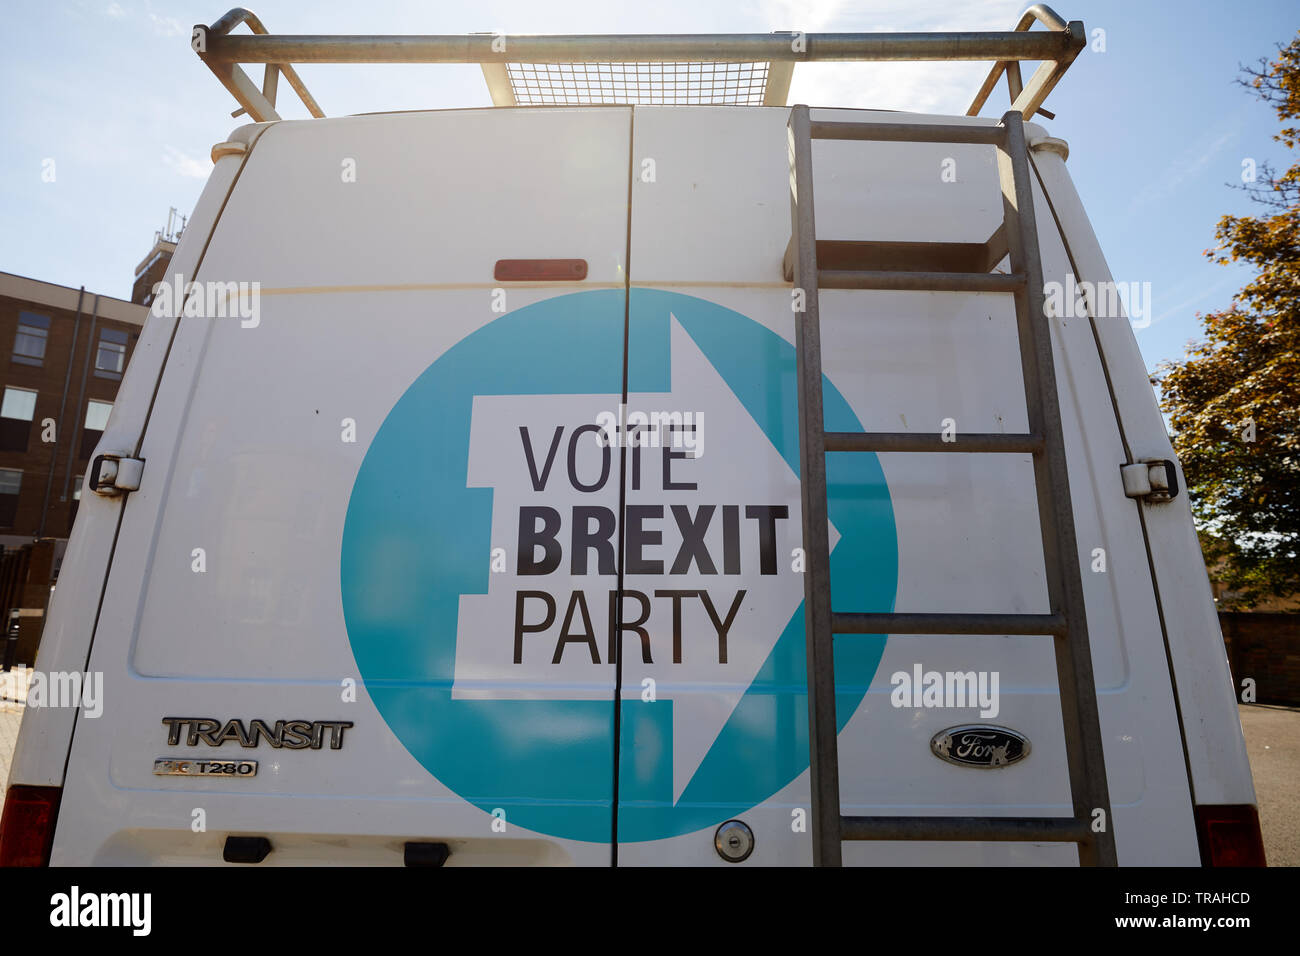 Peterborough, U.K. - 1 June, 2019: A transit van adorned with a Brexit Party logo during campaigning for the Peterborough by-election. Stock Photo